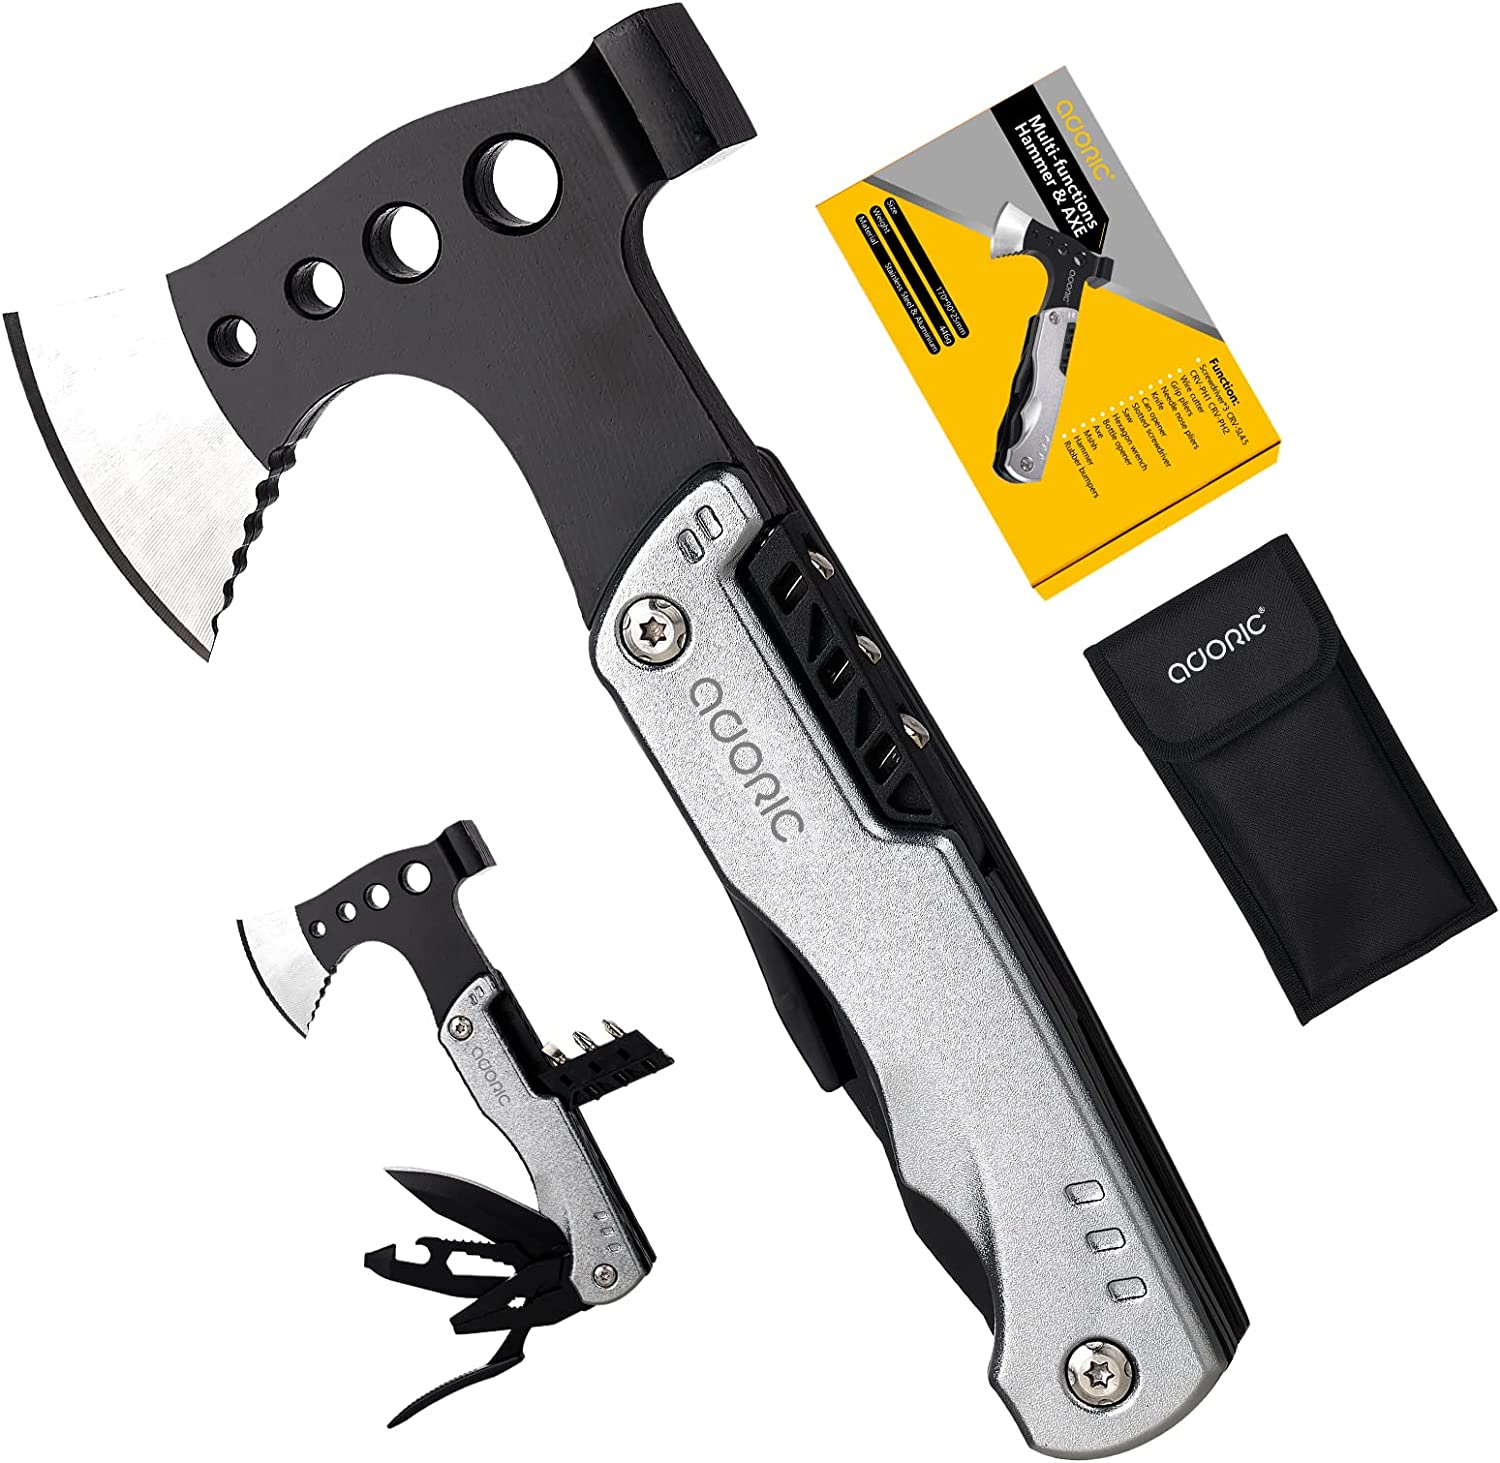 Gifts for Men Dad Christmas, Camping Accessories, Survival Gear and Equipment, Unique Hunting Fishing Gift Ideas for Him Boyfriend Husband Teenage Boys, Cool Gadgets, Multitool Axe